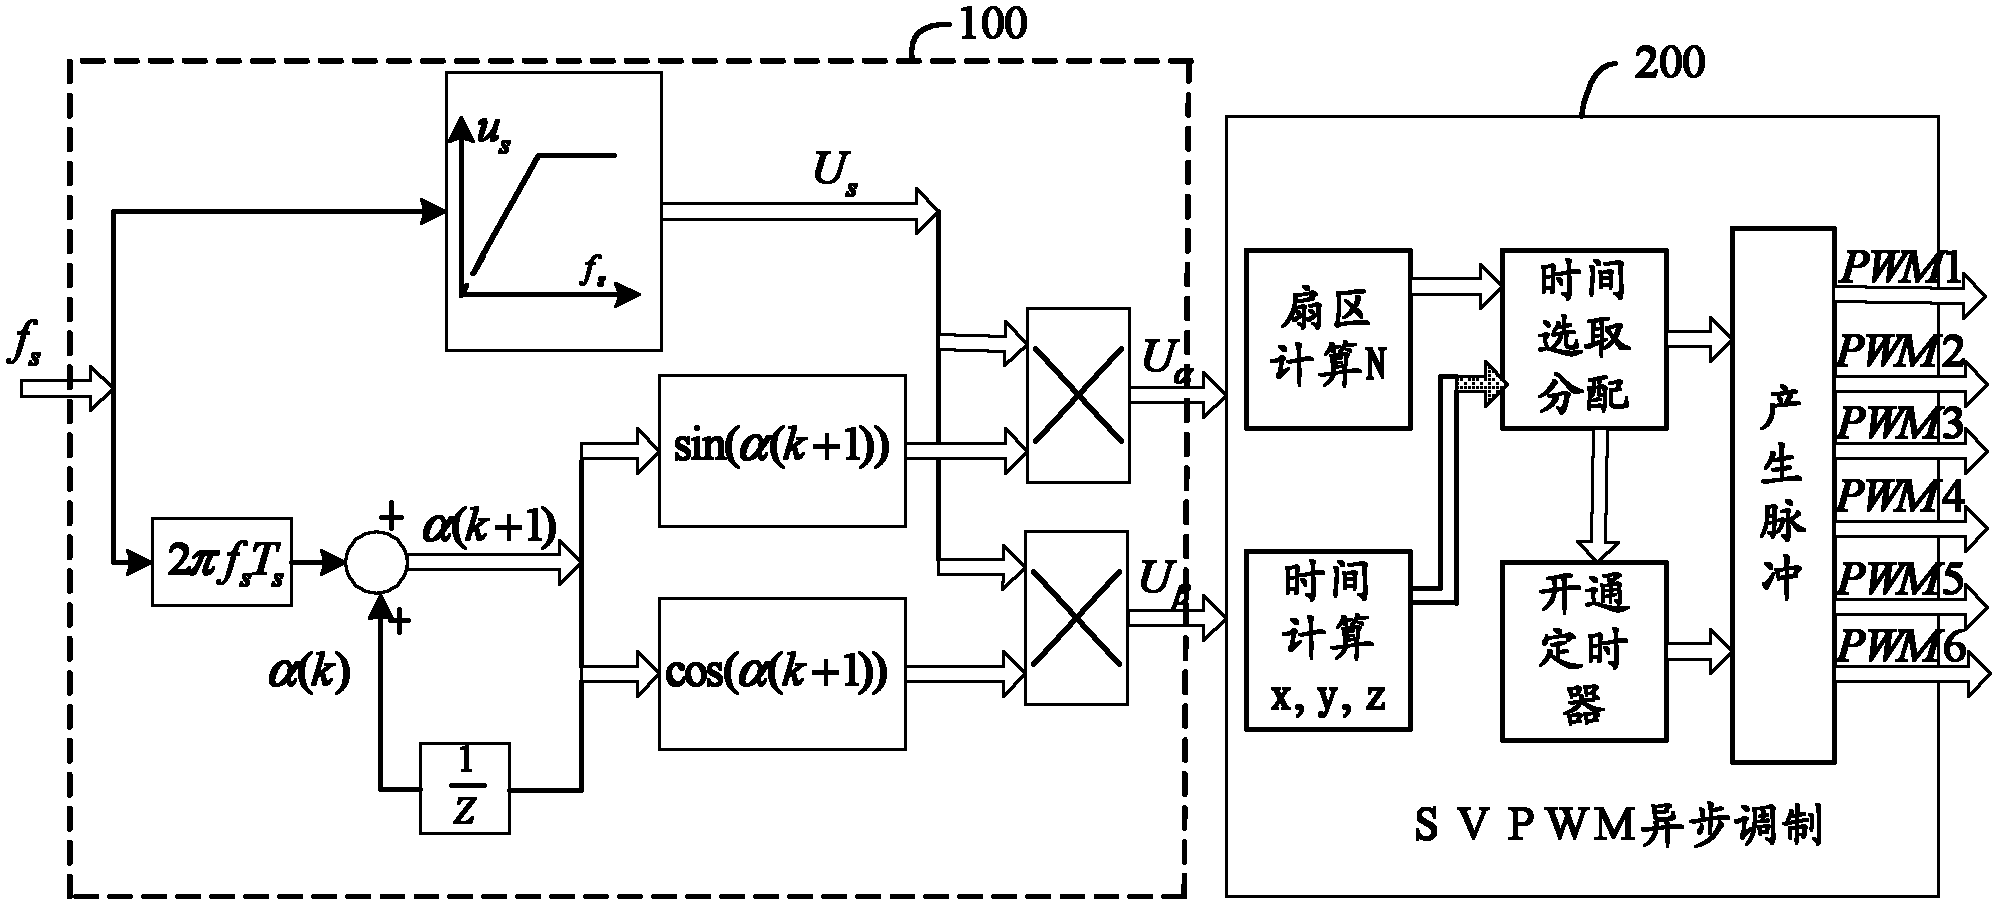 Open-loop control method and open-loop control system of permanent magnet synchronous motor based on space vector pulse width modulation (SVPWM)